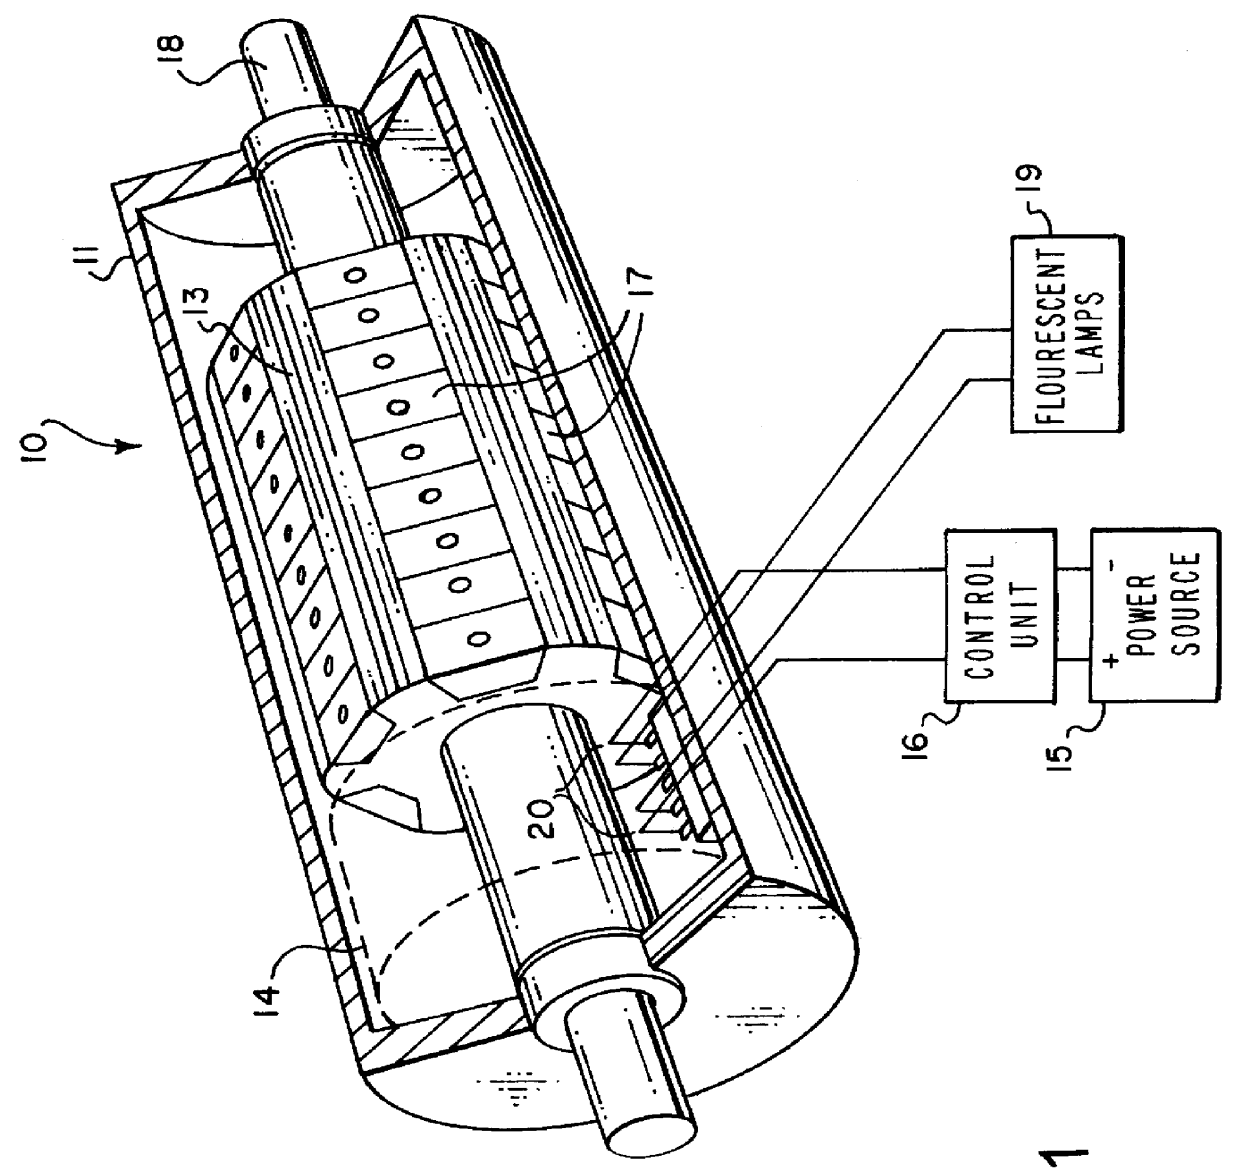 High efficiency electro-mechanical energy conversion device